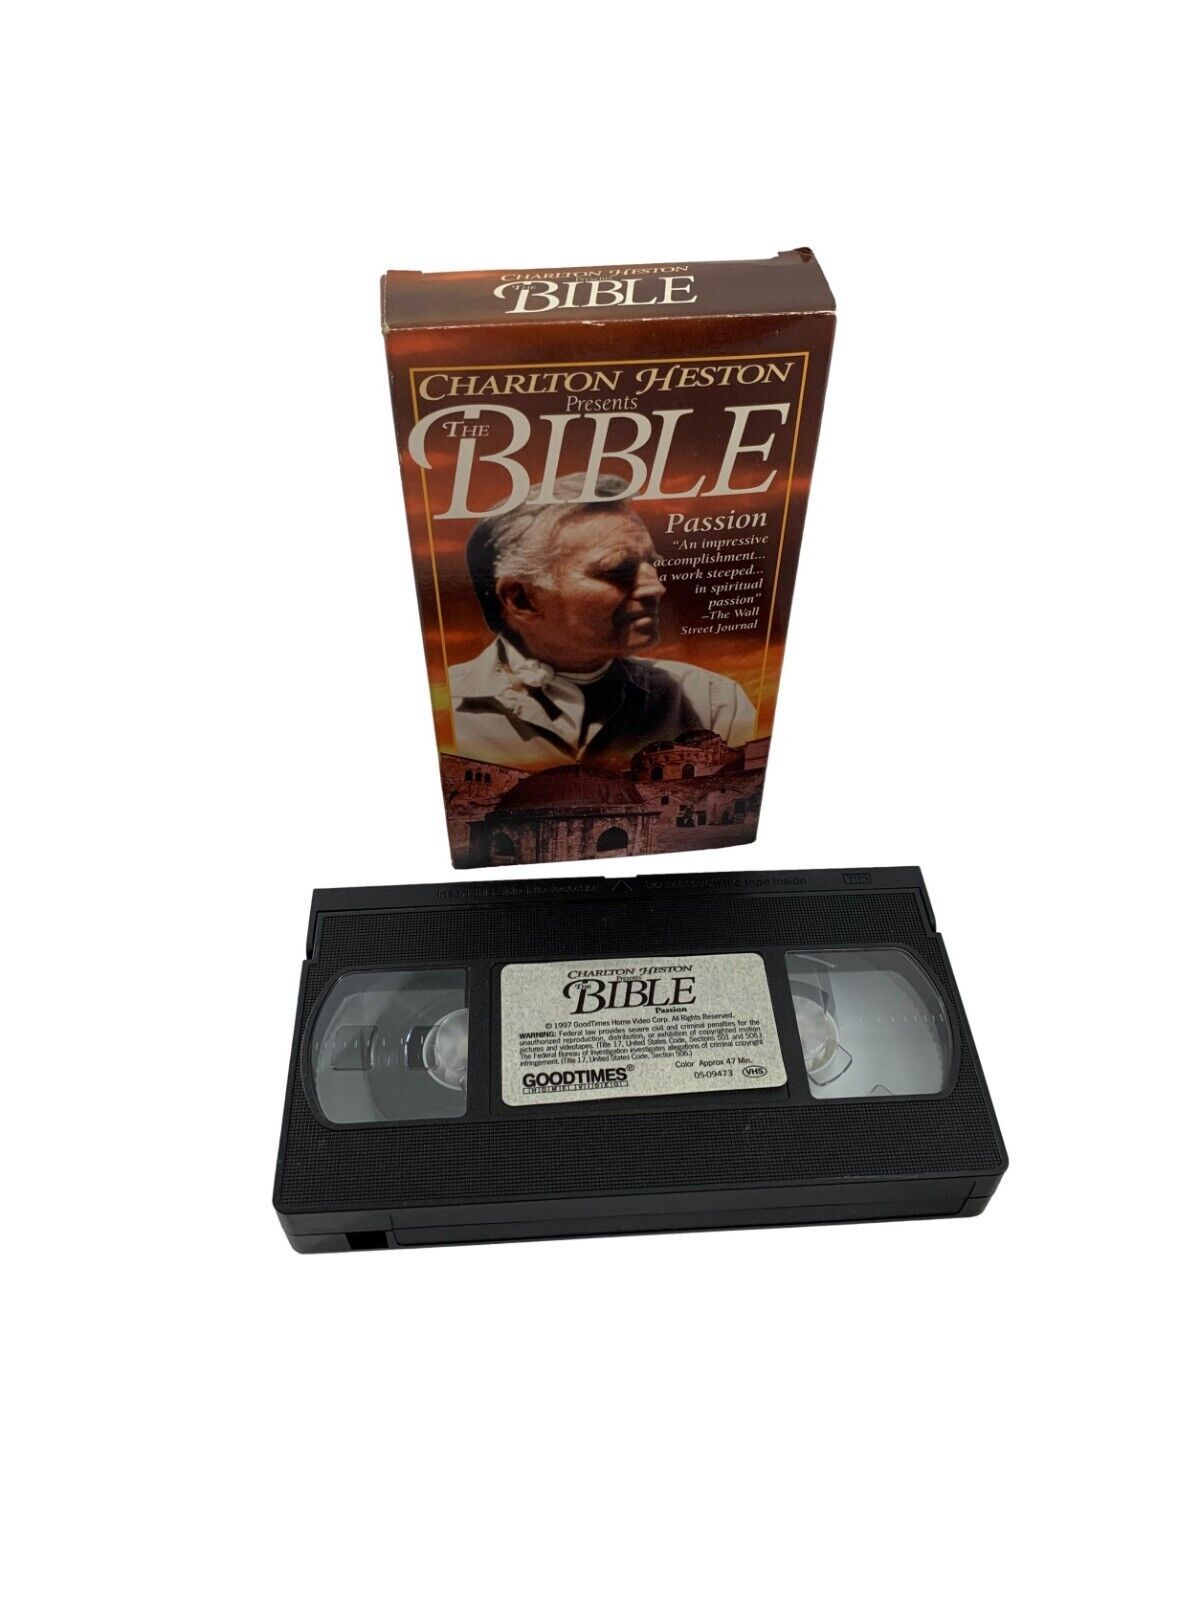 Primary image for Vintage 1993 Charlton Heston The Bible Passion VHS Christian Video Tape -
sho...